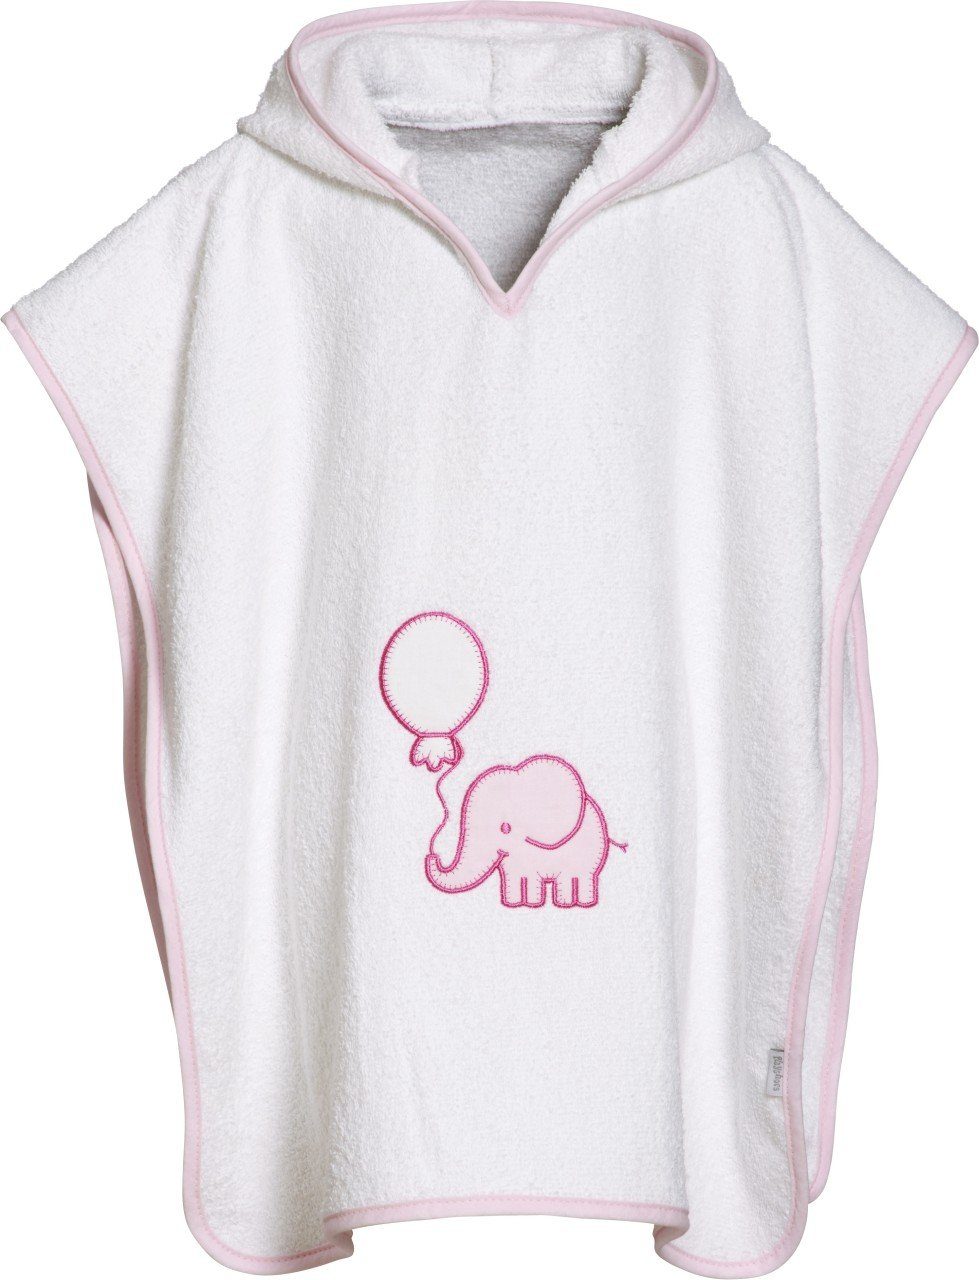 Playshoes Badeponcho Frottee-Poncho Elefant weiß/rosa